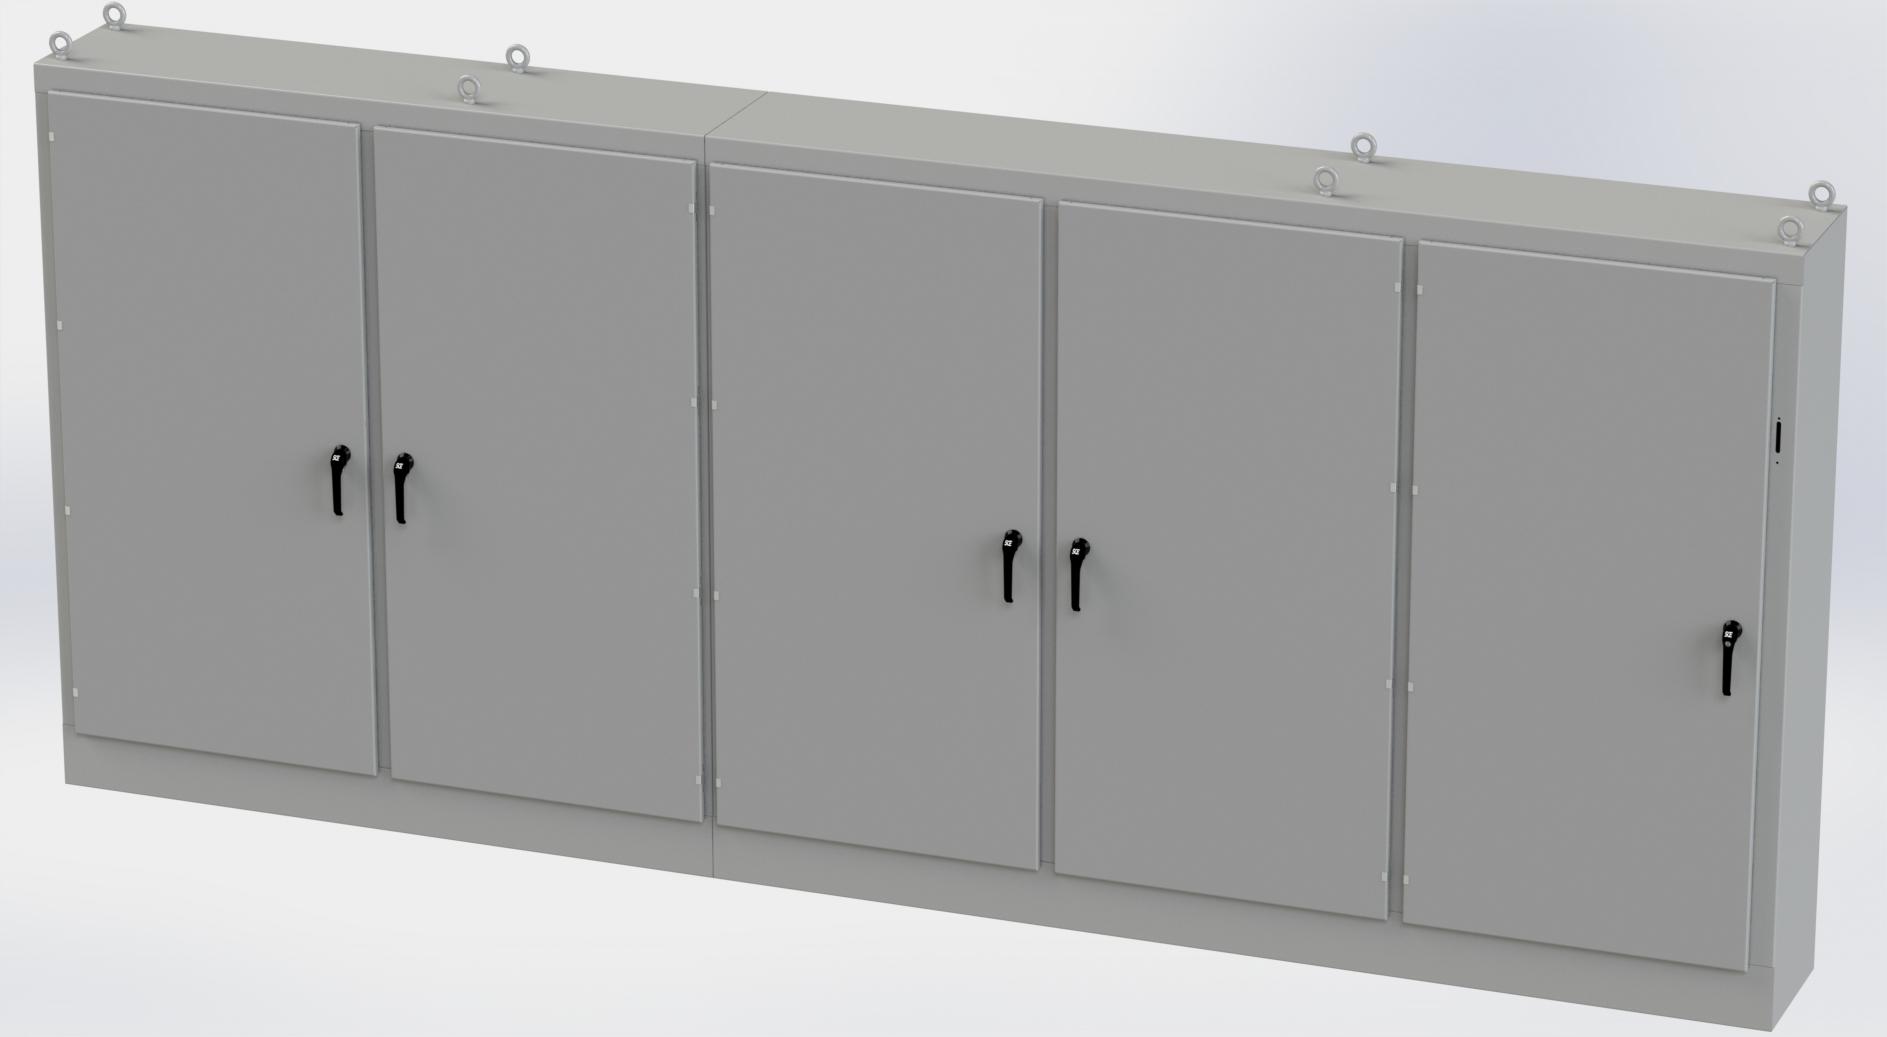 Saginaw Control SCE-84XM5EW18G 5DR XM Enclosure, Height:84.00", Width:196.75", Depth:18.00", ANSI-61 gray powder coating inside and out. Sub-panels are powder coated white.